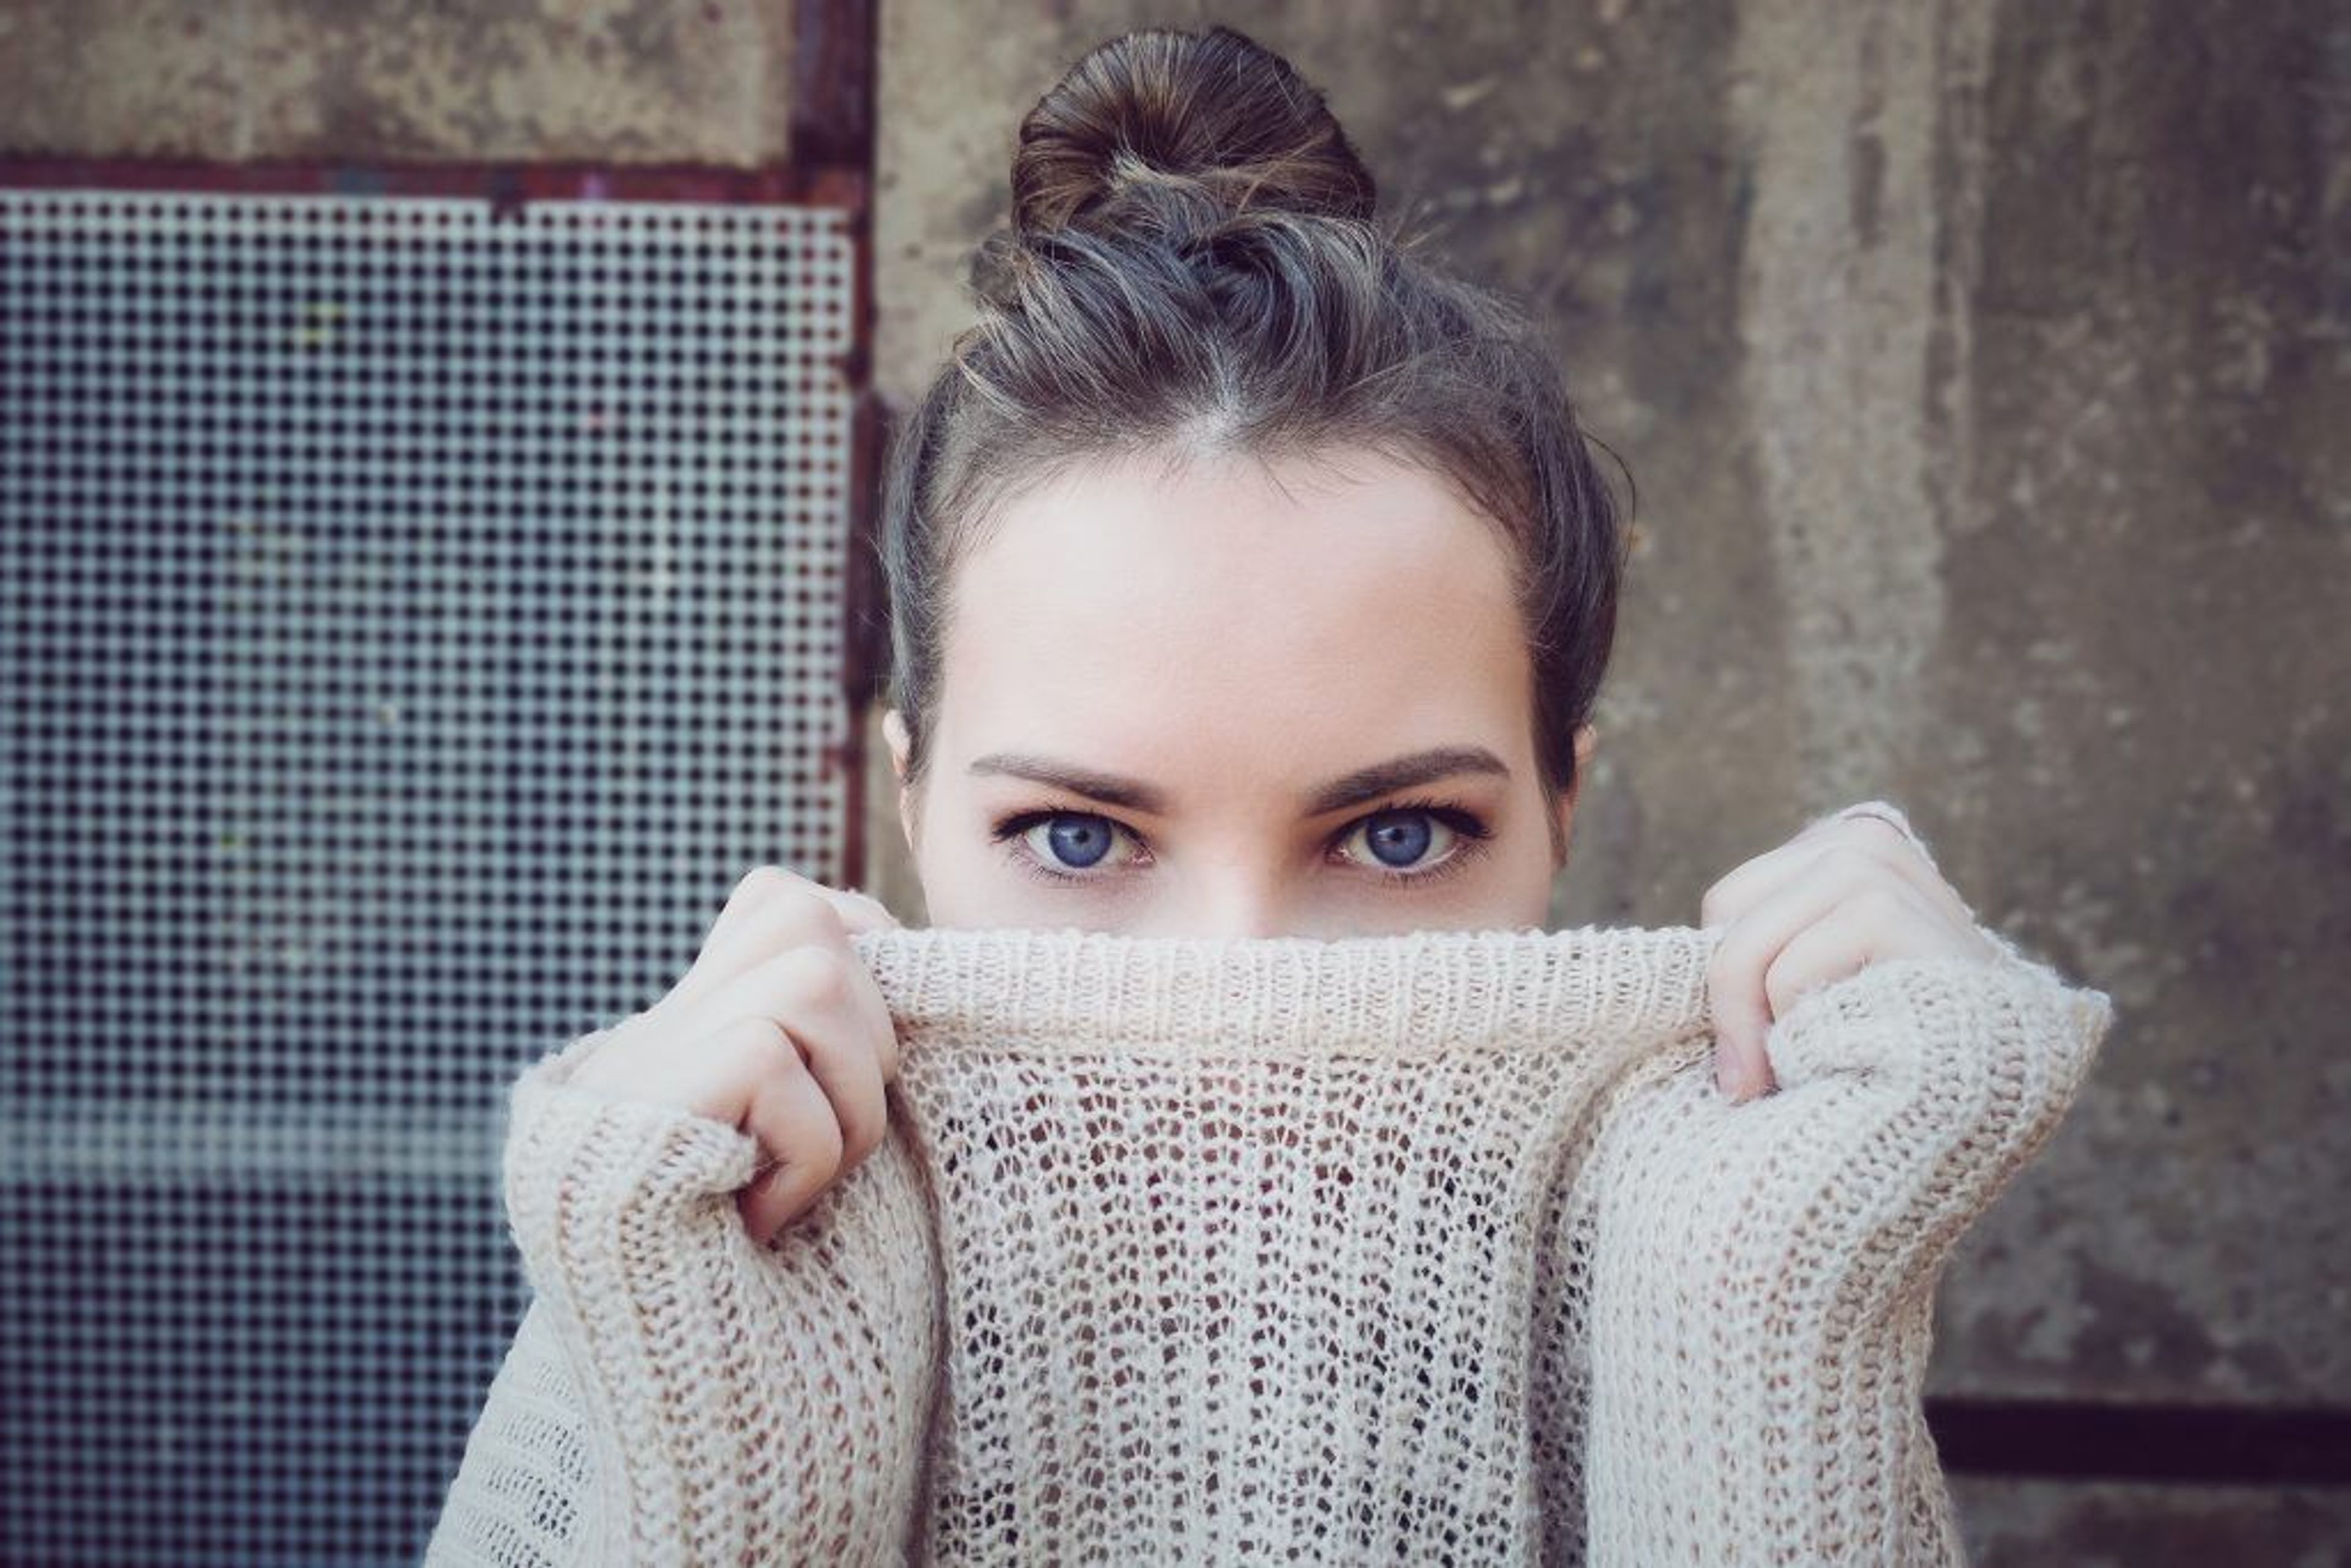 Woman pulling her sweater over her face 